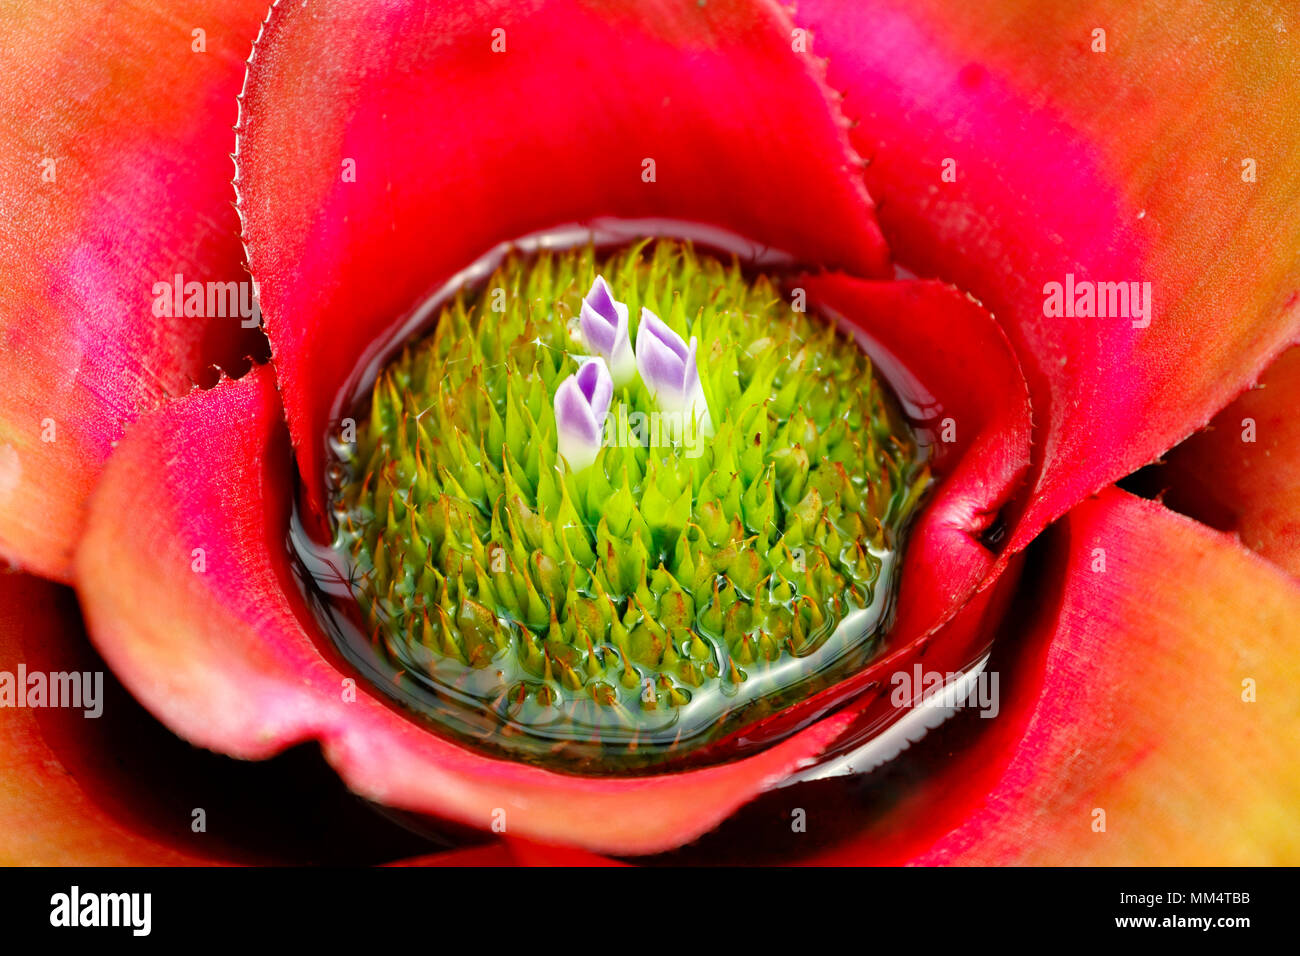 Closeup colorful bromeliad (Bromeliaceae) plant background with flower Stock Photo